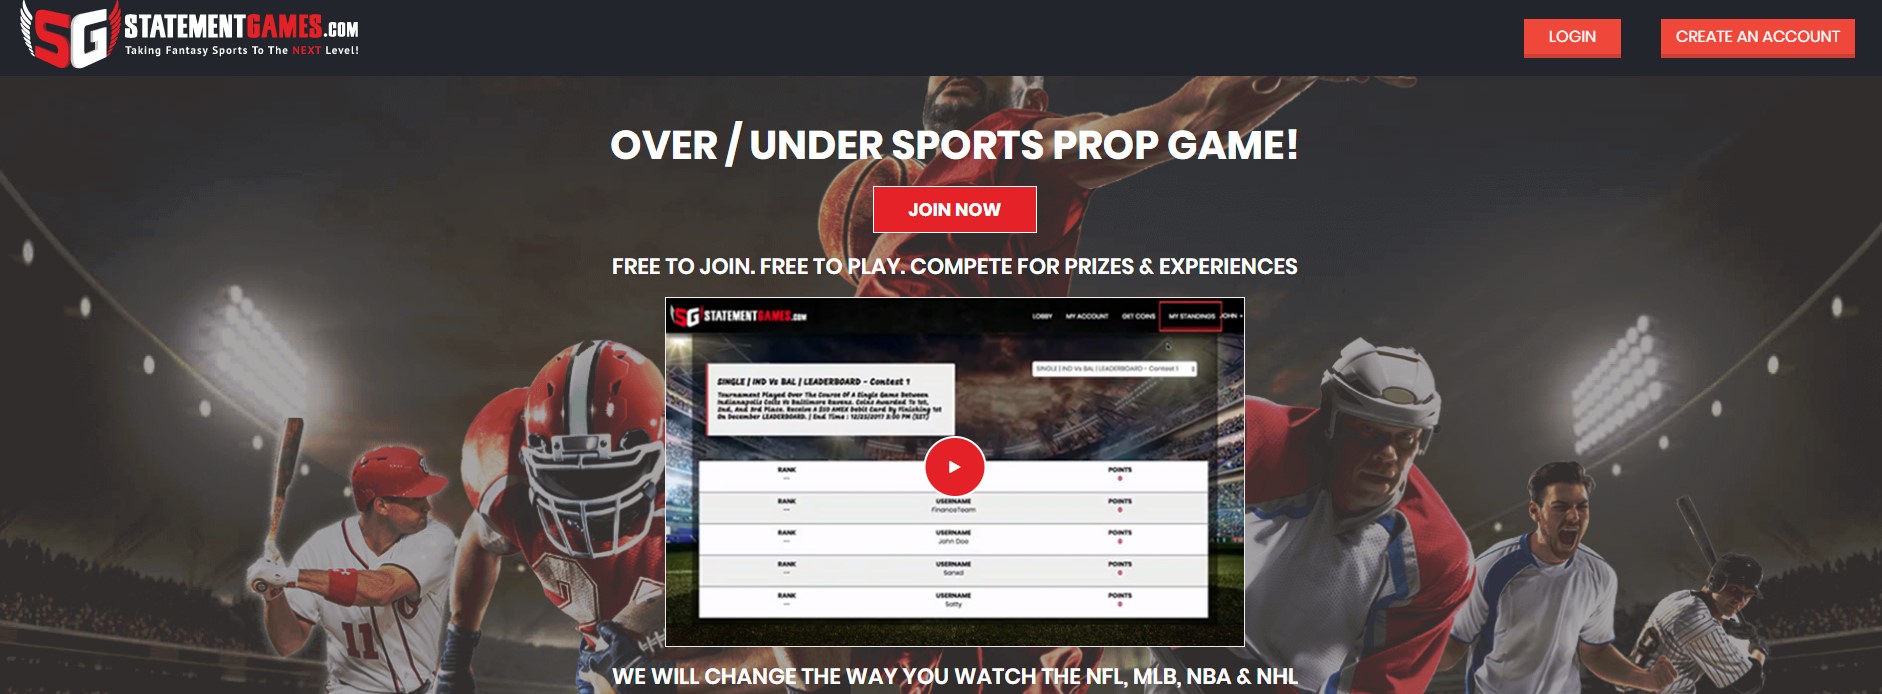 Statementgames launches new fantasy sports game